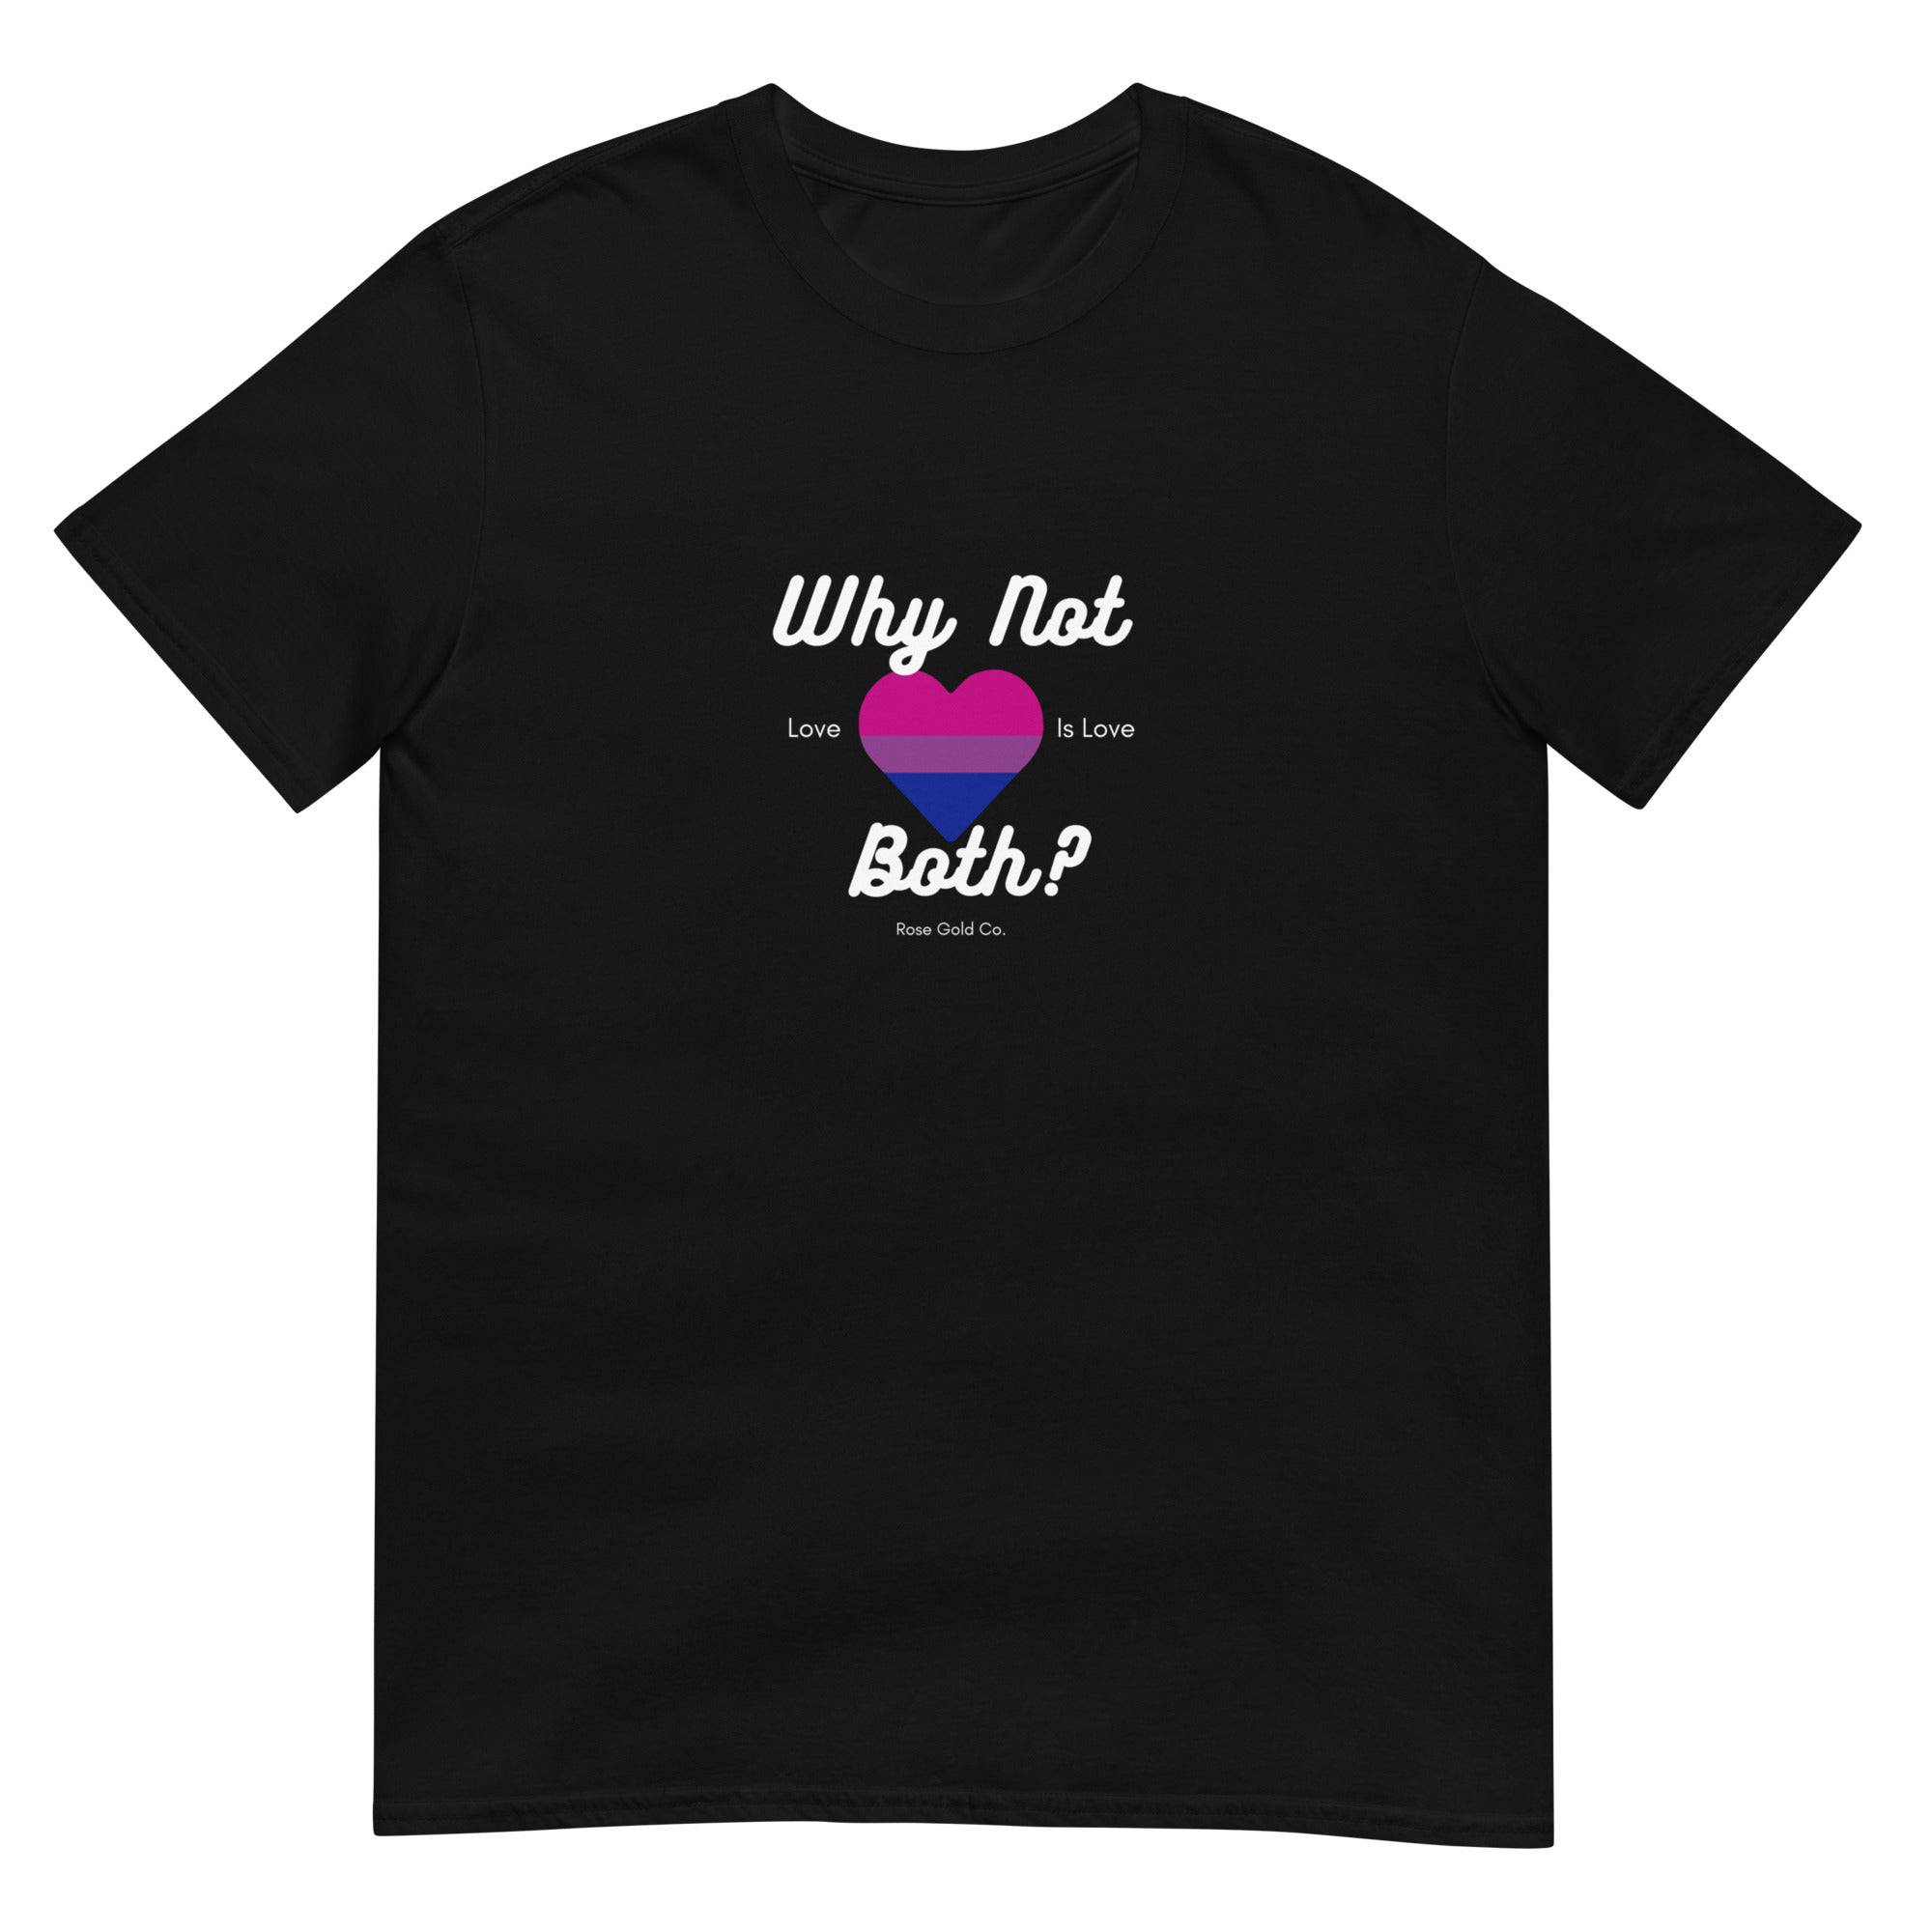 Why Not Both? Bisexual Pride T-Shirt